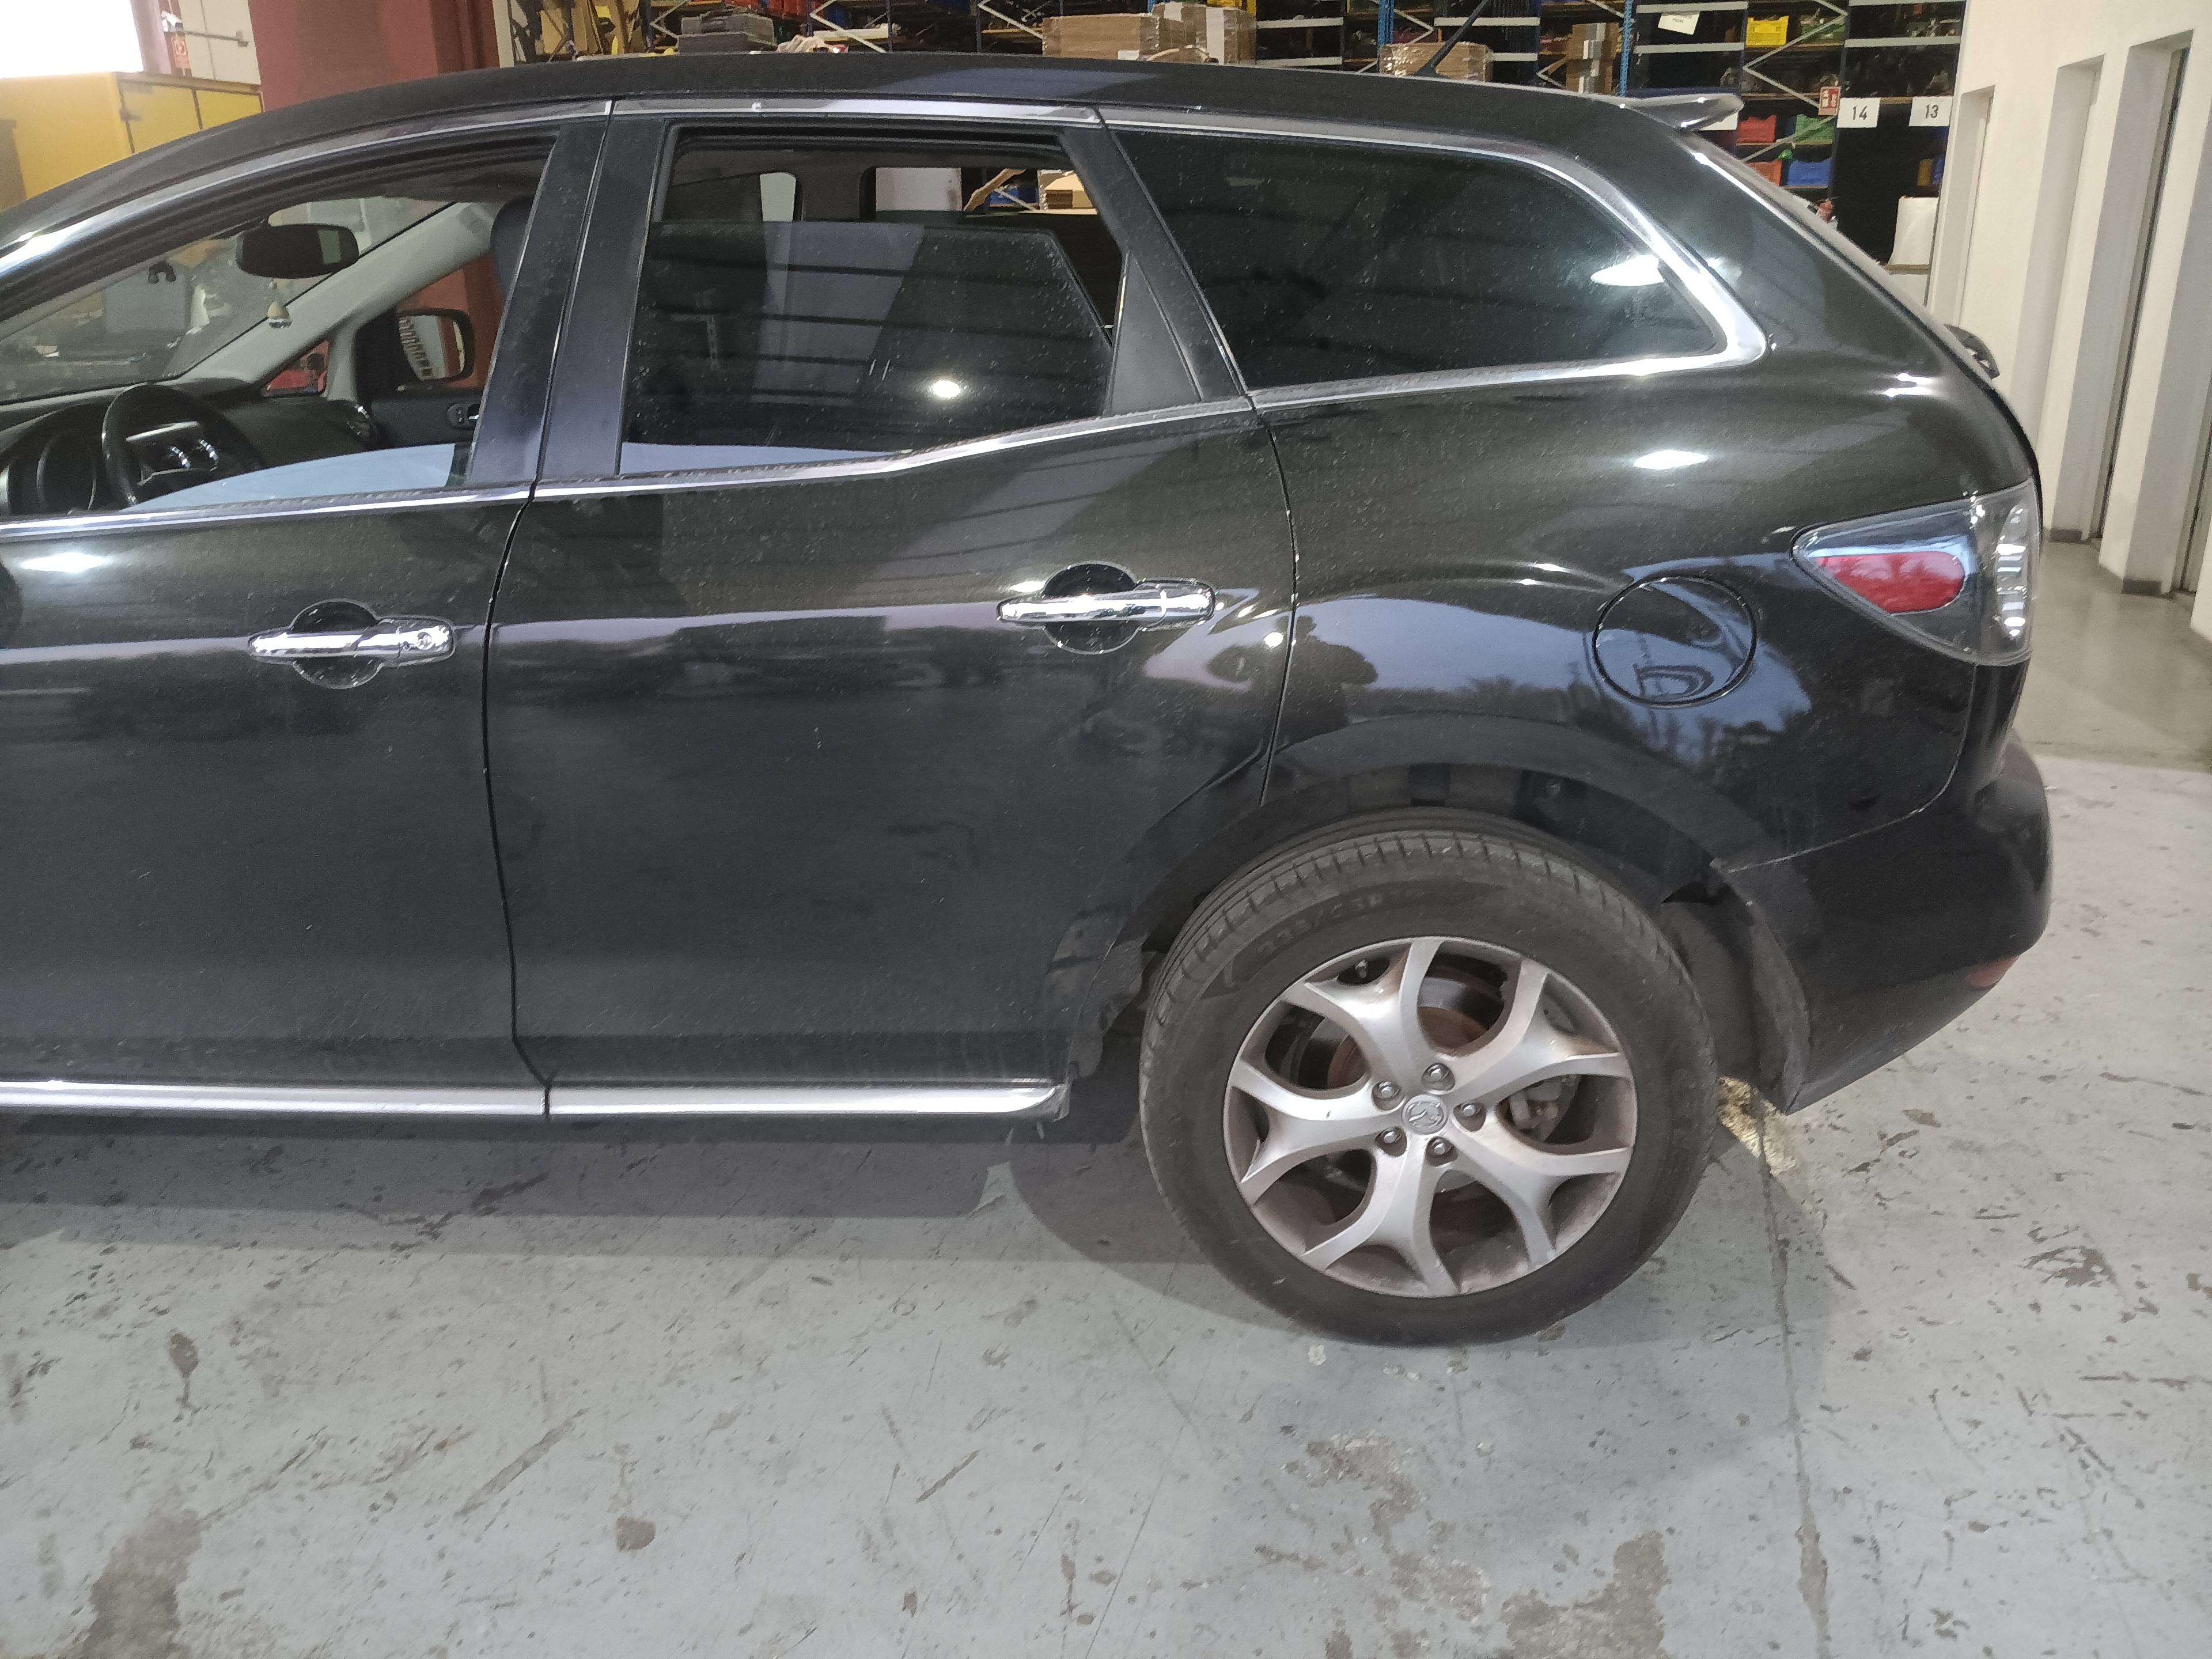 MAZDA CX-7 1 generation (2006-2012) Other Body Parts K42387390, 04M20D00081 23500439